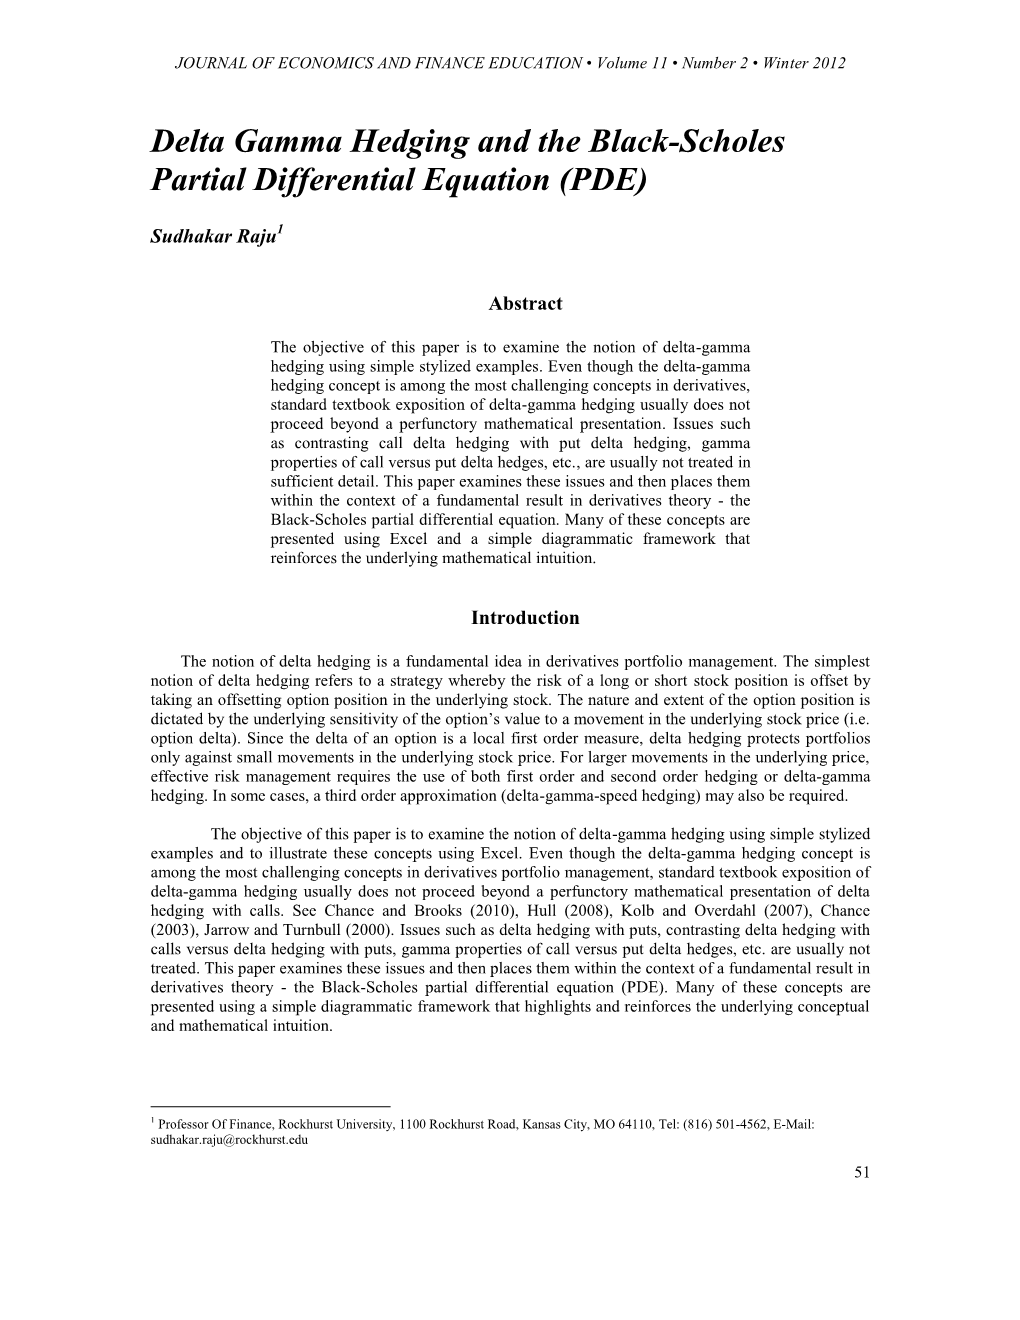 Delta Gamma Hedging and the Black-Scholes Partial Differential Equation (PDE)